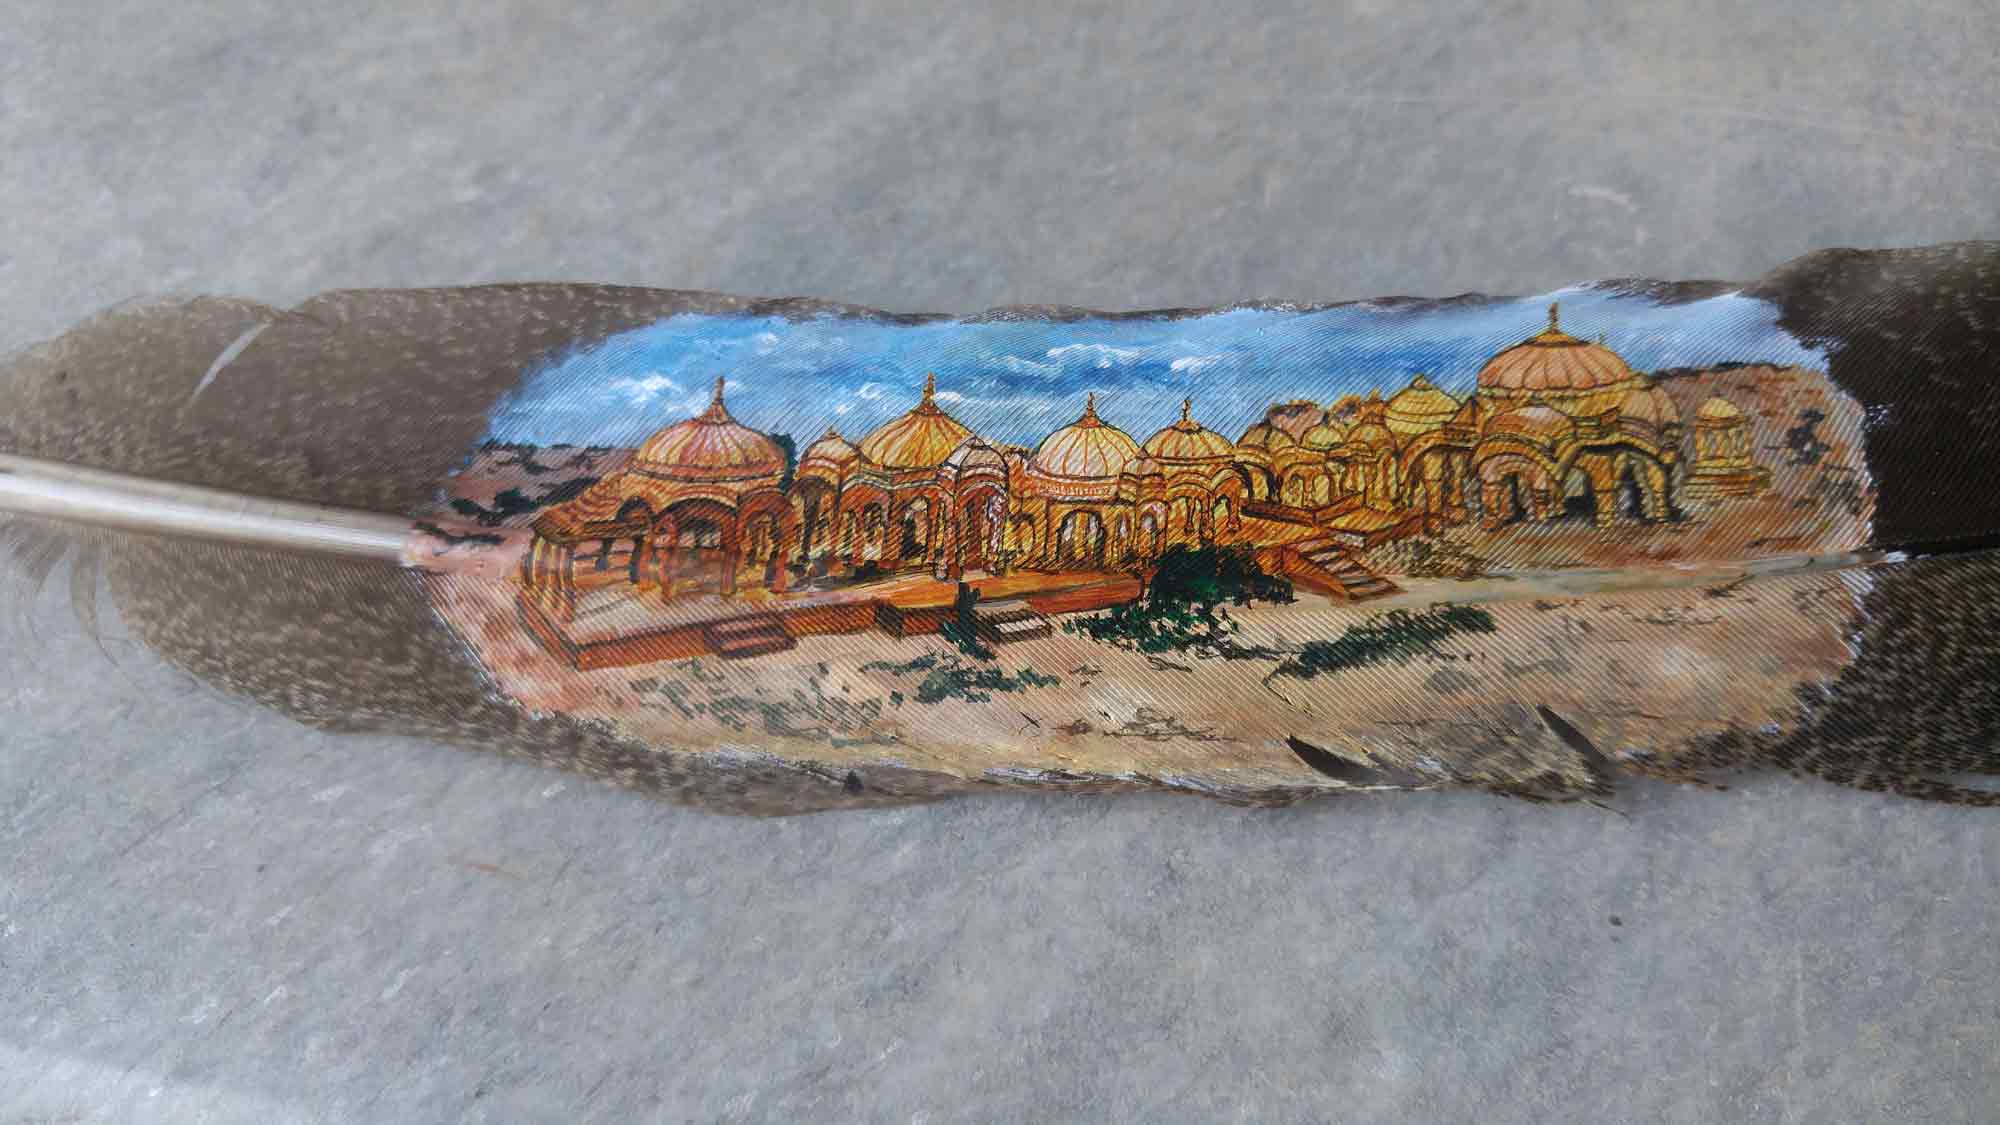 Realism Painting with Mixed Media on Feather "Bada Bagh Jaisalmer" art by Aditi Agarwal